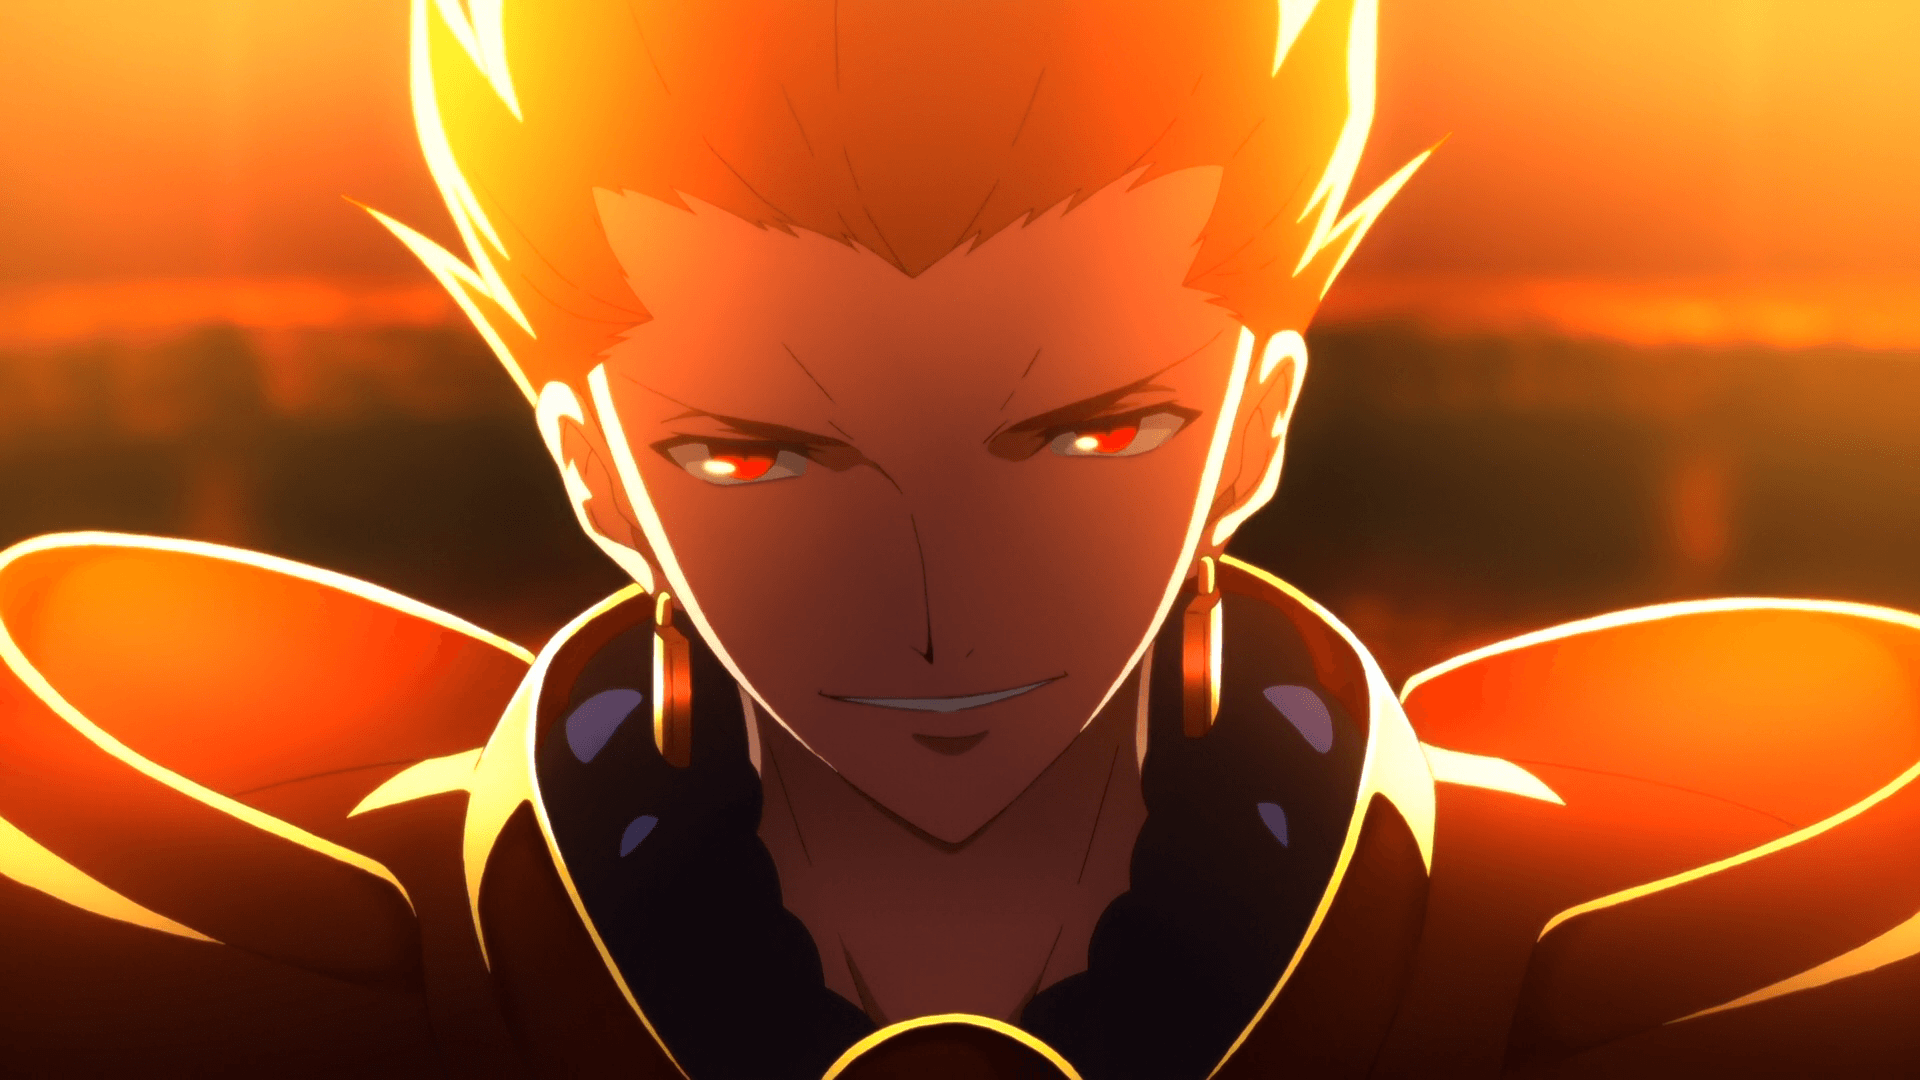 Character Of The Week: Gilgamesh Fate Zero And Fate Stay Night